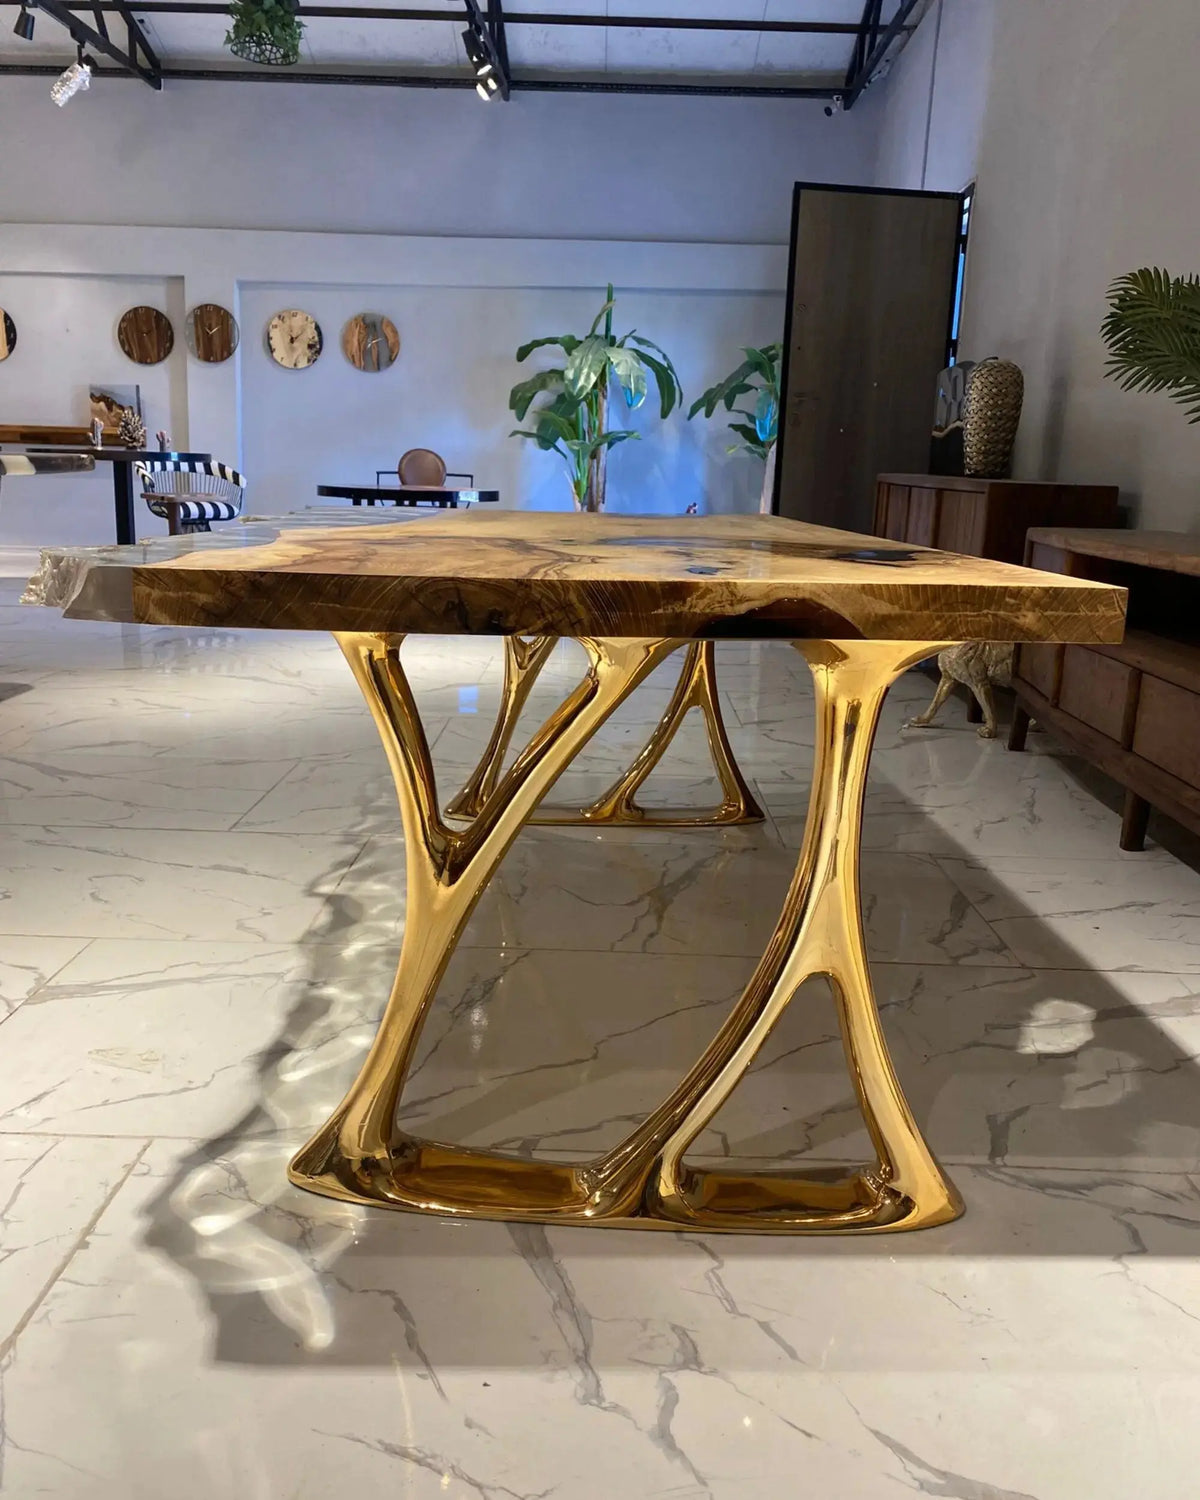 Clear Resin Table Top | Live Edge Desk | Natural Ash Wood